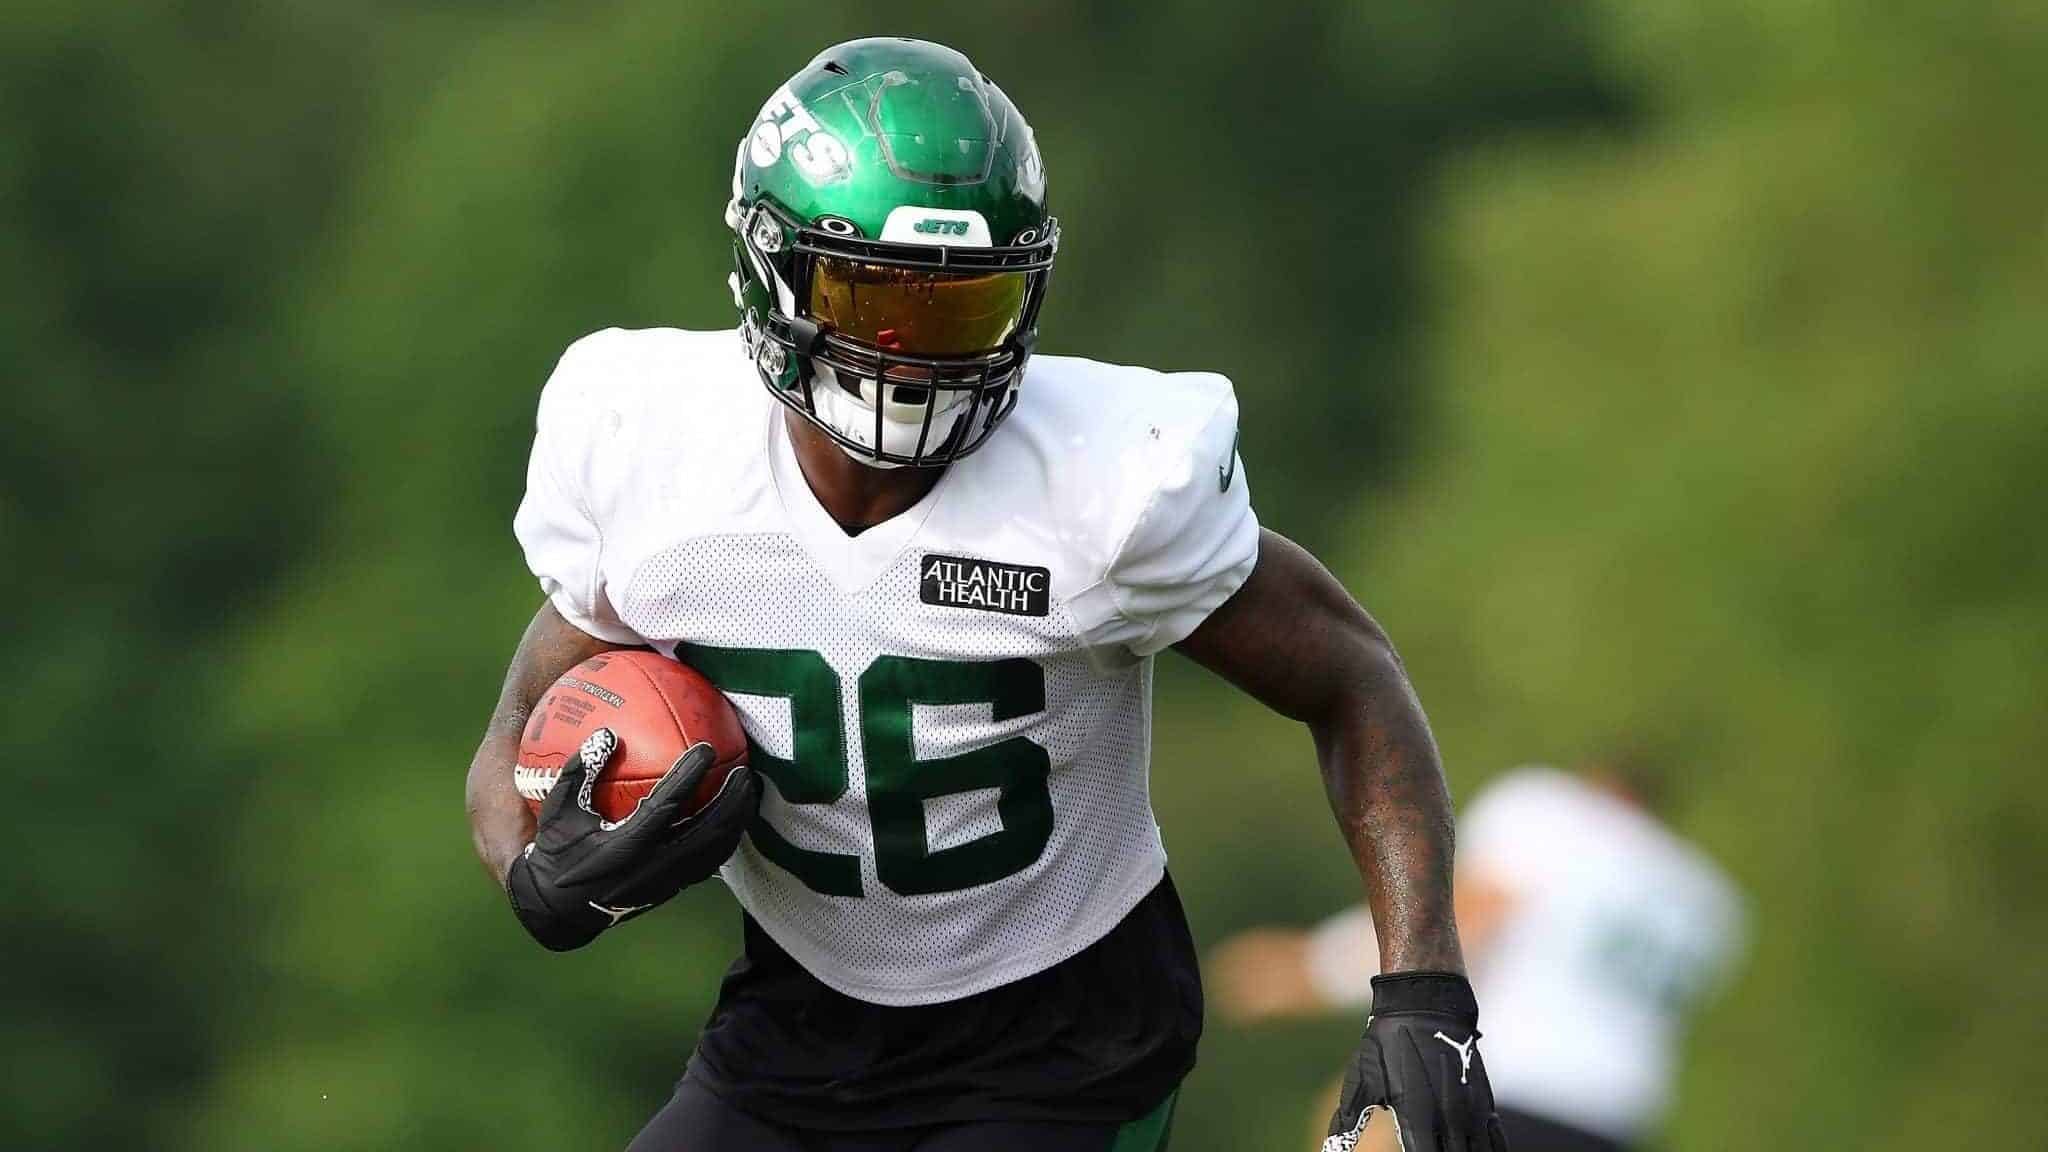 FLORHAM PARK, NEW JERSEY - AUGUST 23: Le'Veon Bell #26 of the New York Jets runs drills at Atlantic Health Jets Training Center on August 23, 2020 in Florham Park, New Jersey.